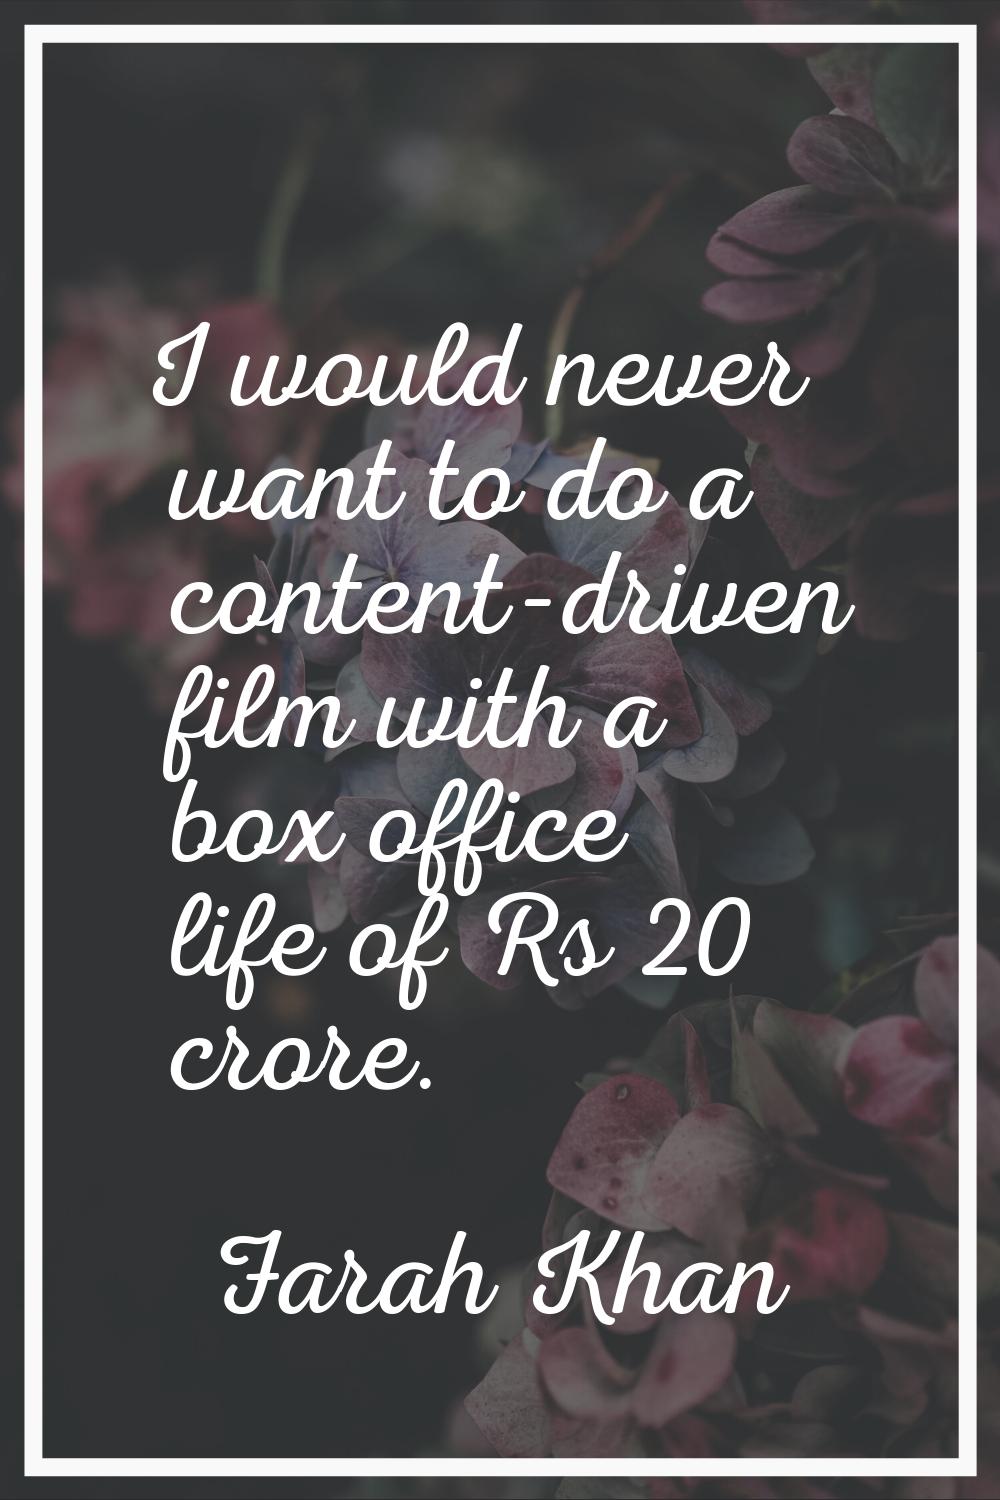 I would never want to do a content-driven film with a box office life of Rs 20 crore.